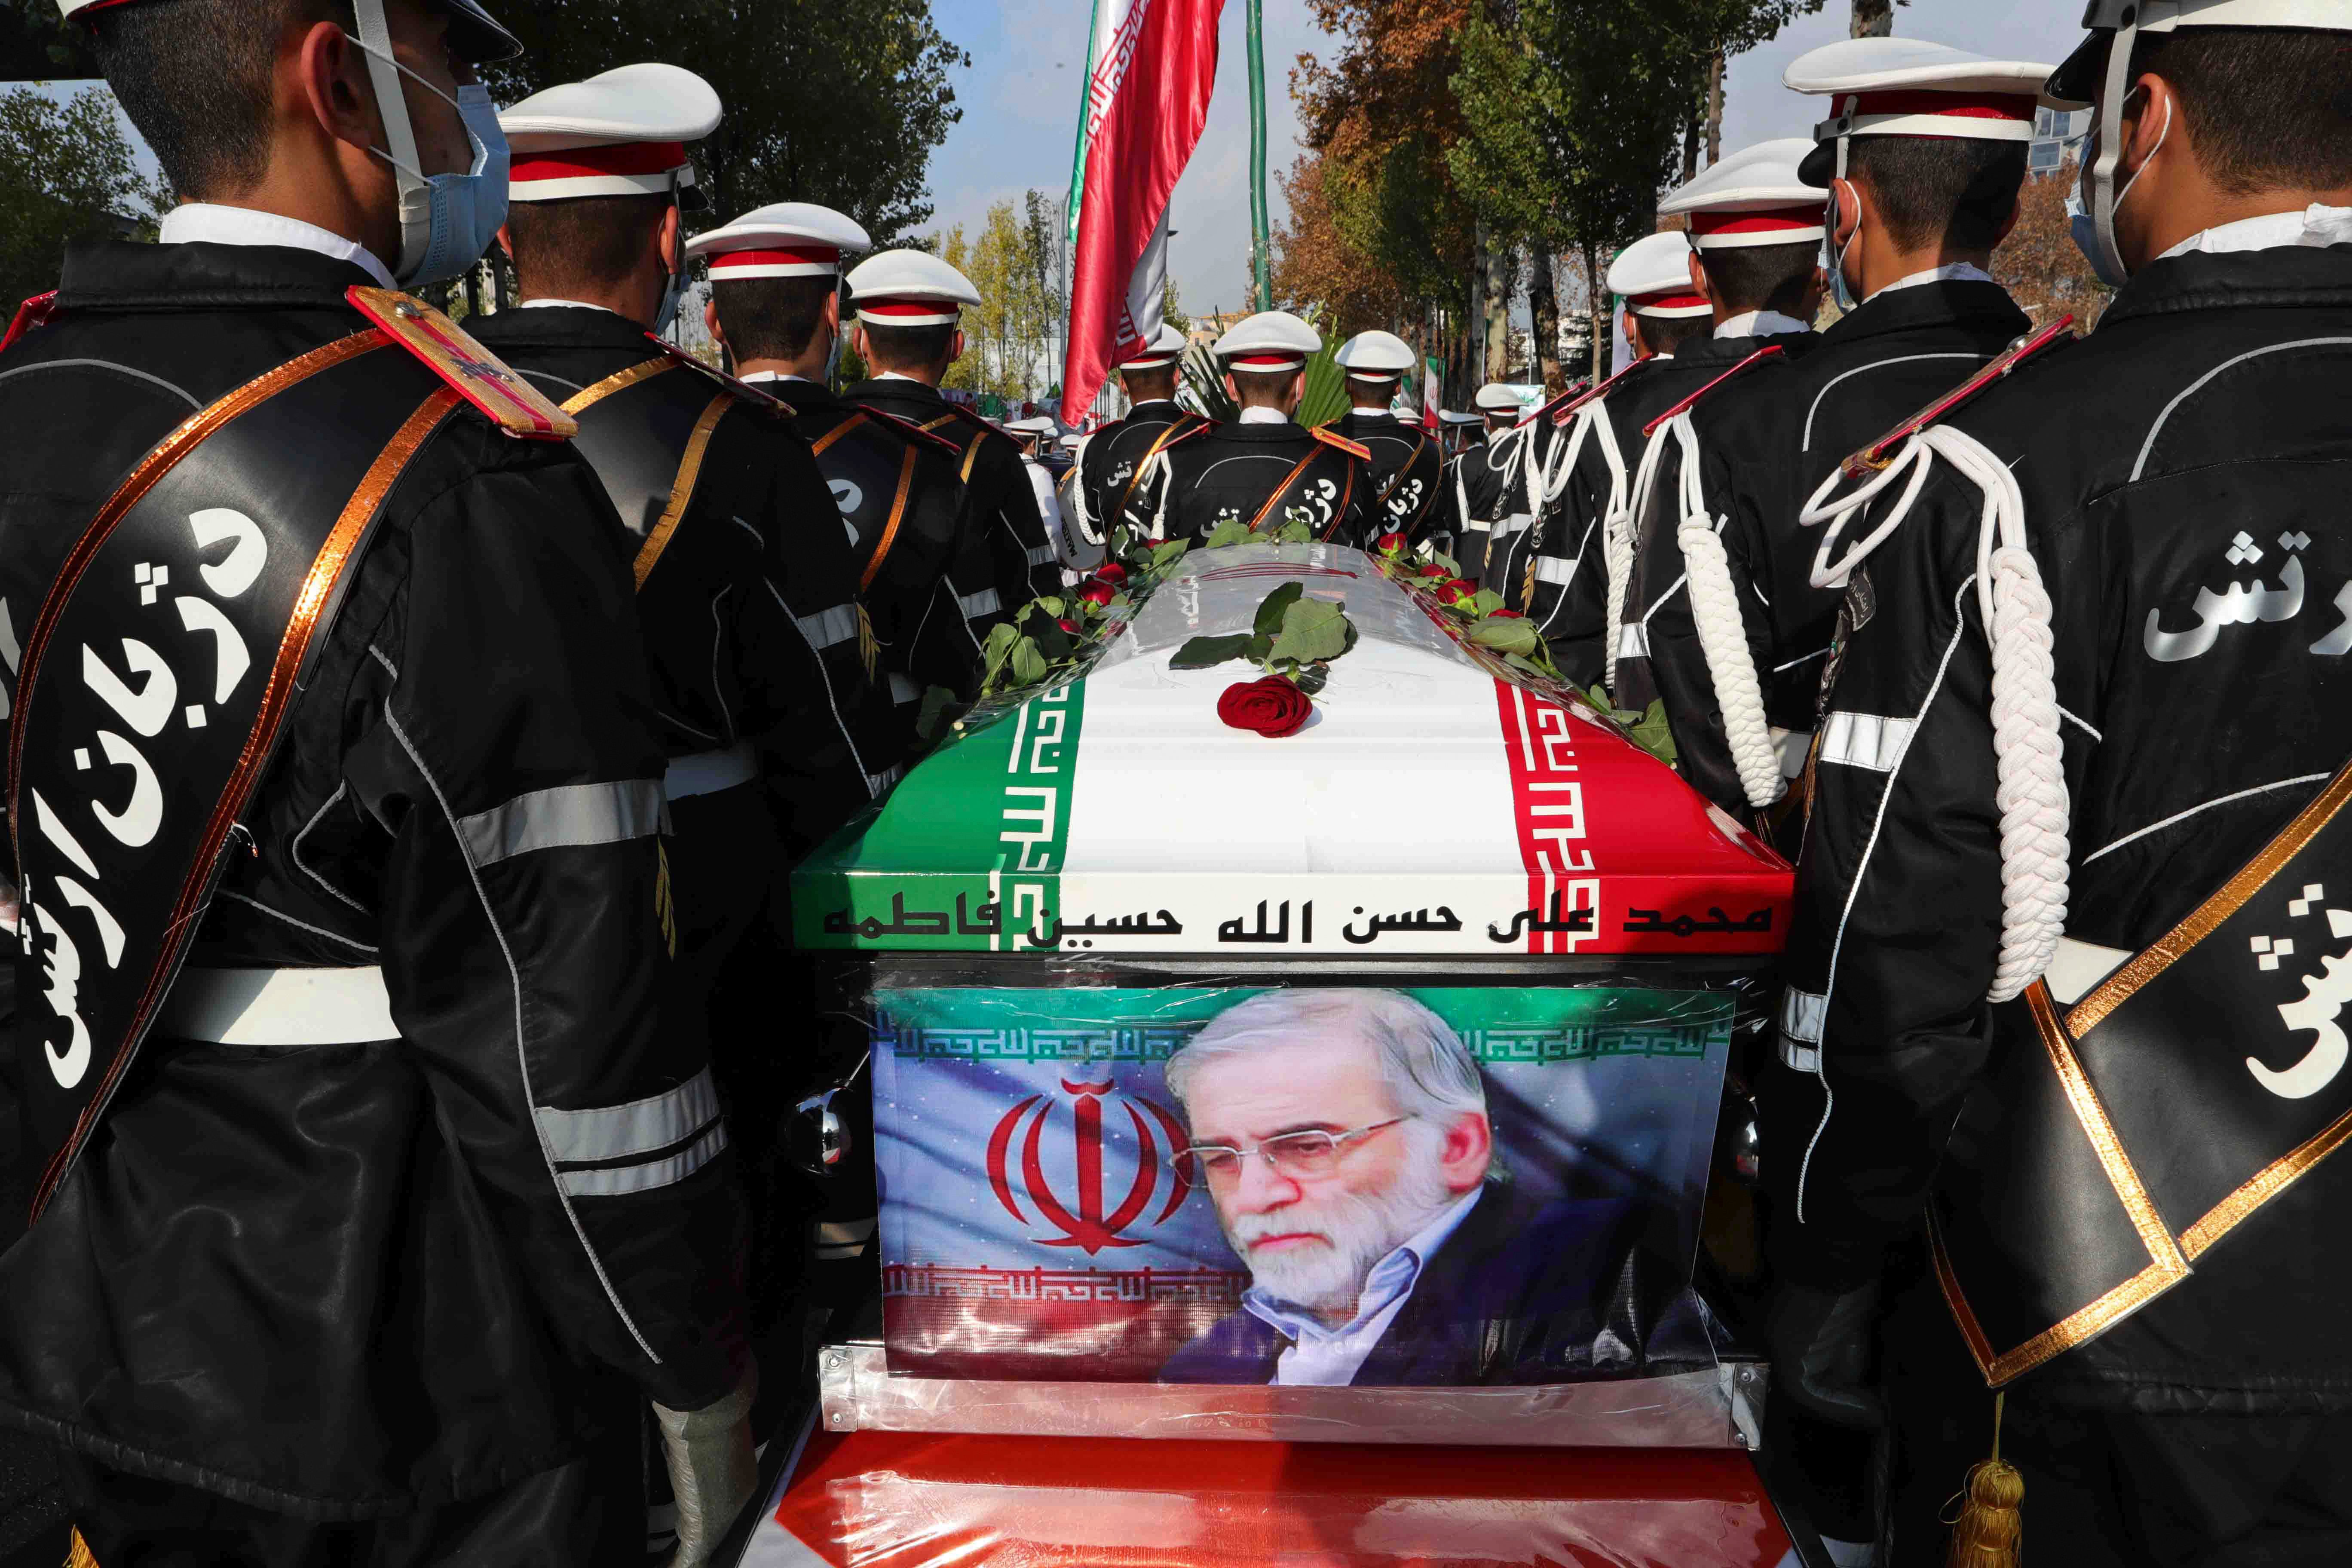 The flag-draped coffin of Mohsen Fakhrizadeh, the nuclear scientist killed last month (Iranian Defence Ministry via AP)